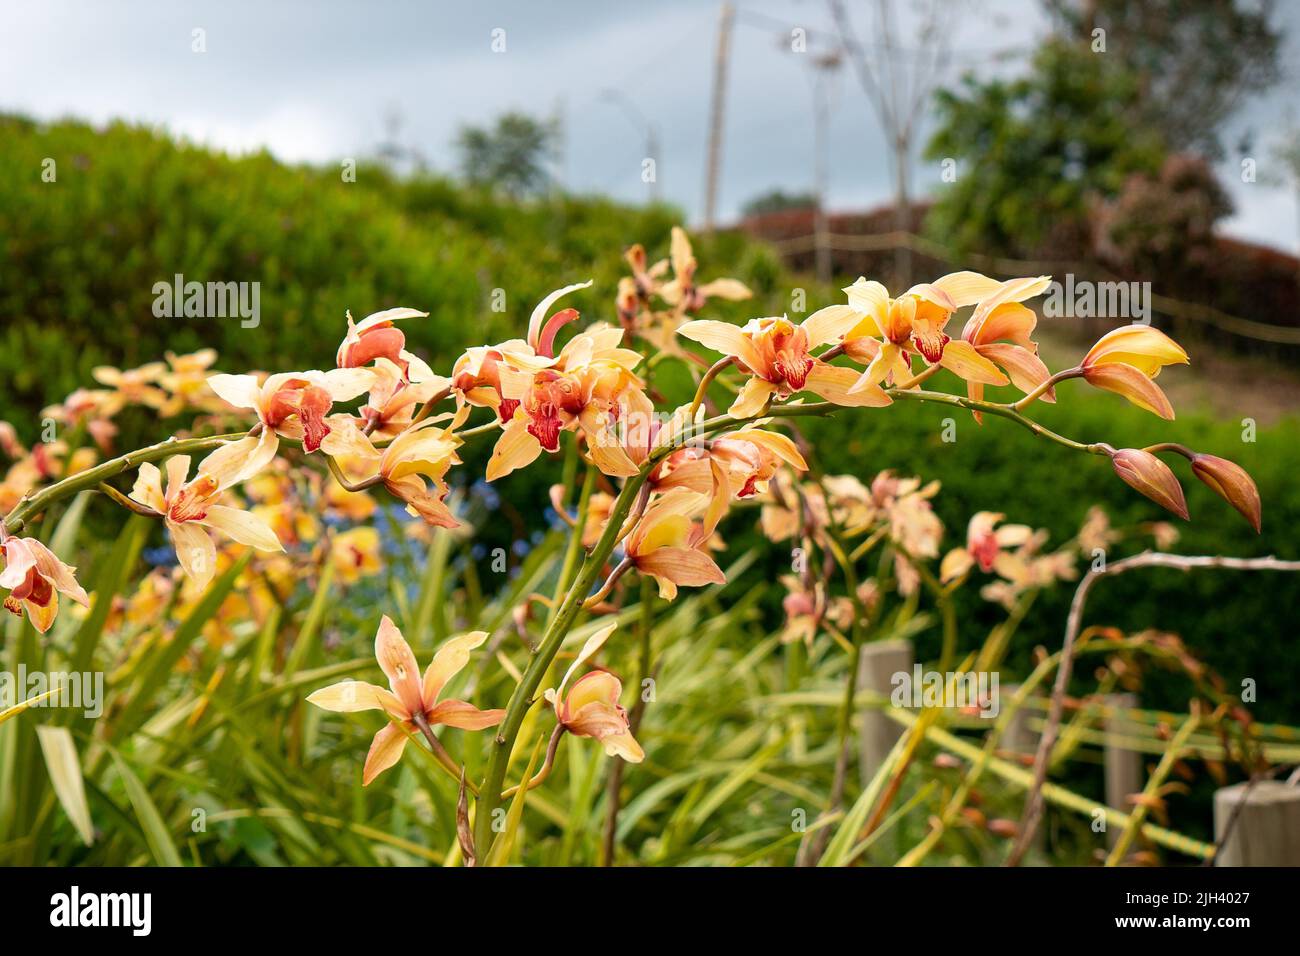 Yellow Flowers with Orange and Red (Cymbidium sinense) Moving in the Wind in the Garden Stock Photo